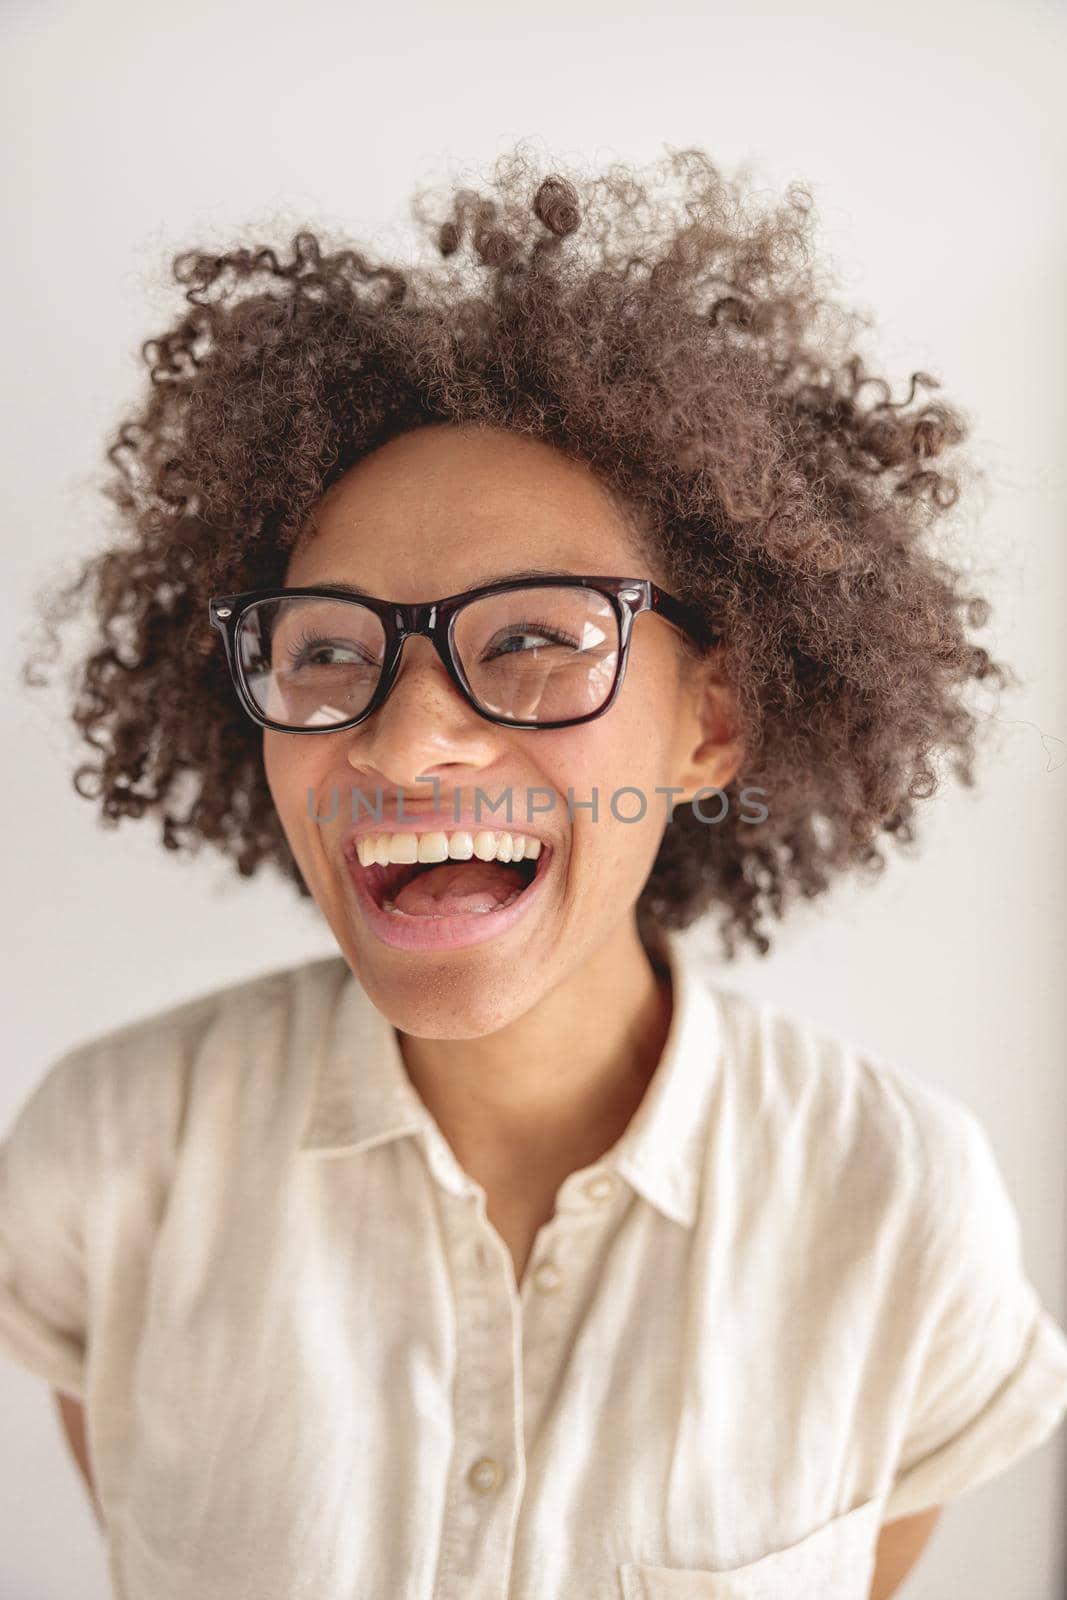 Portrait of young Afro American lady in glasses laughing and looking away, isolated on grey background